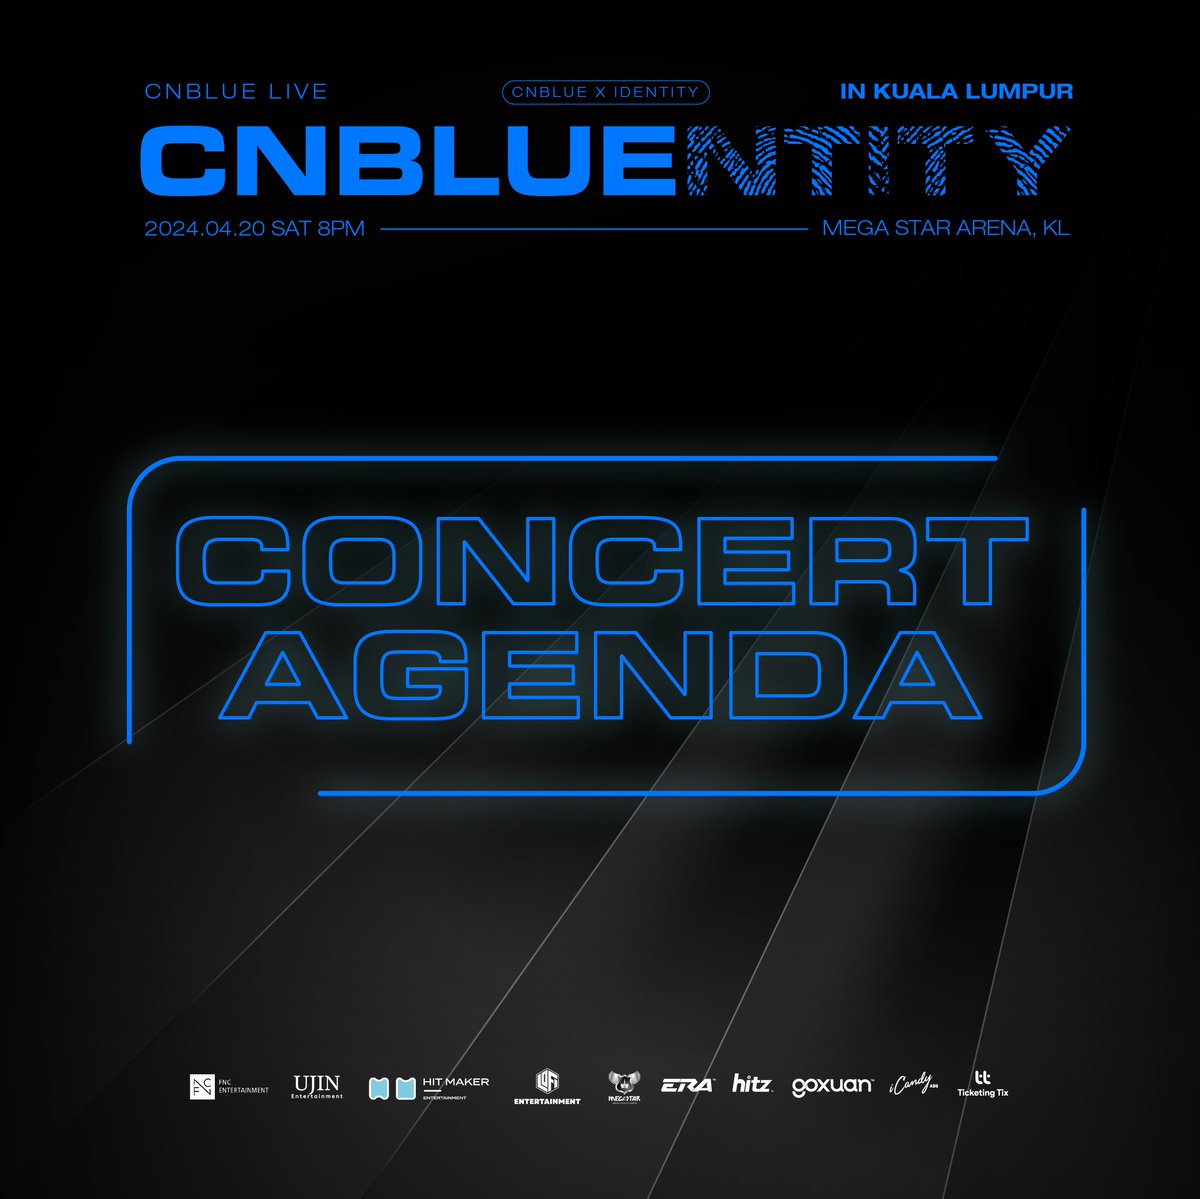 2024 CNBLUE LIVE 'CNBLUENTITY' IN KUALA LUMPUR - CONCERT AGENDA

Check out the full agenda for CNBLUE'S CONCERT in KL. Kindly be reminded that punctuality matters, please take note of the redemption/ door open time.
#CNBLUE #씨엔블루 #CNBLUENTITY #BOICE
⬇️
instagram.com/p/C5z-9X0SV0N/…